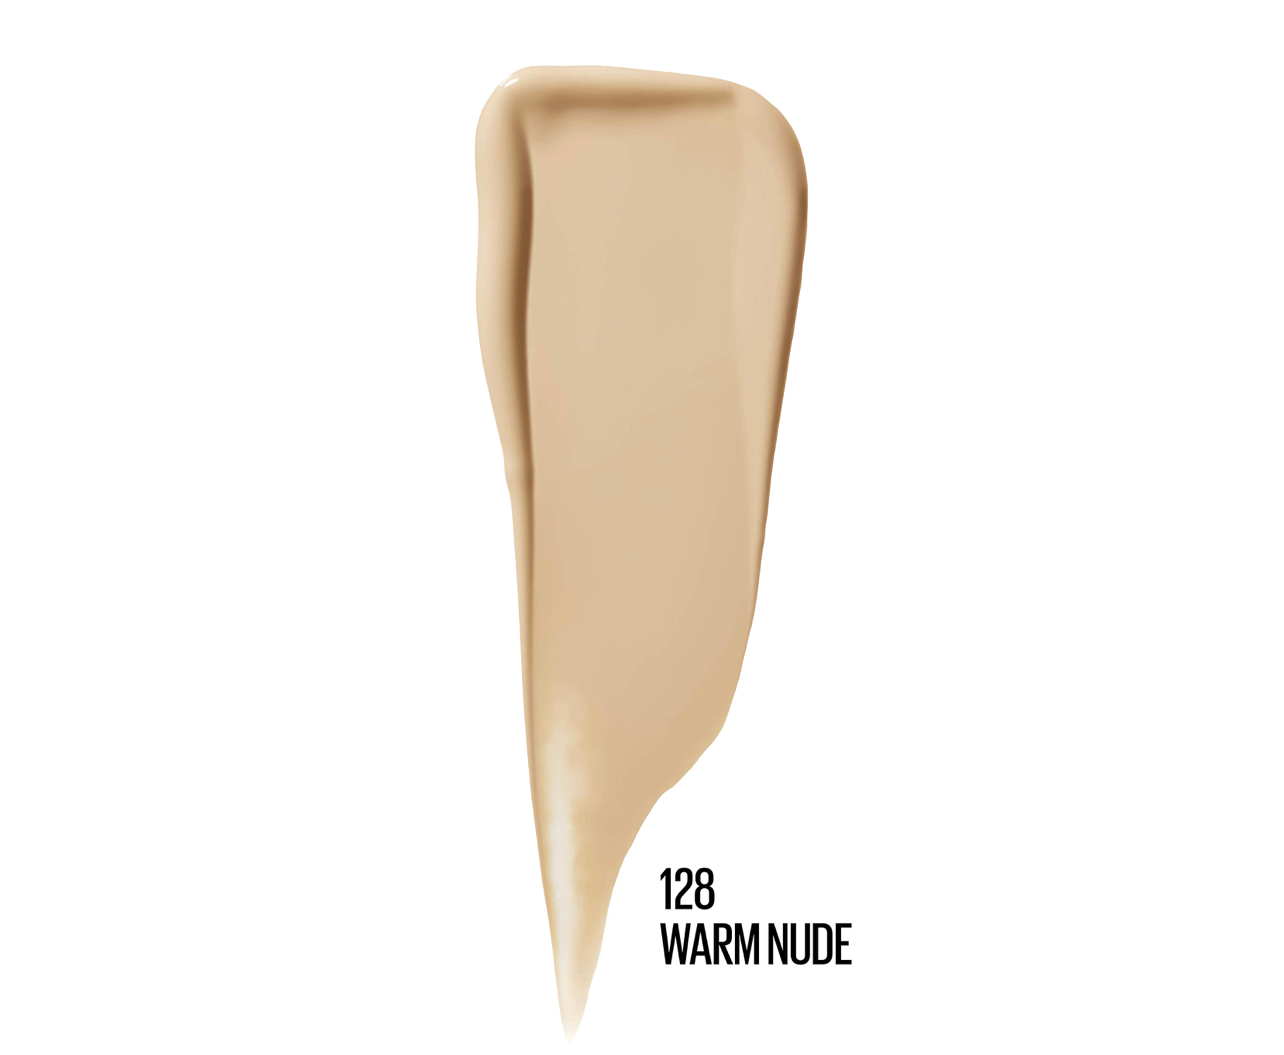 Maybelline dream cover full coverage - Warm nude